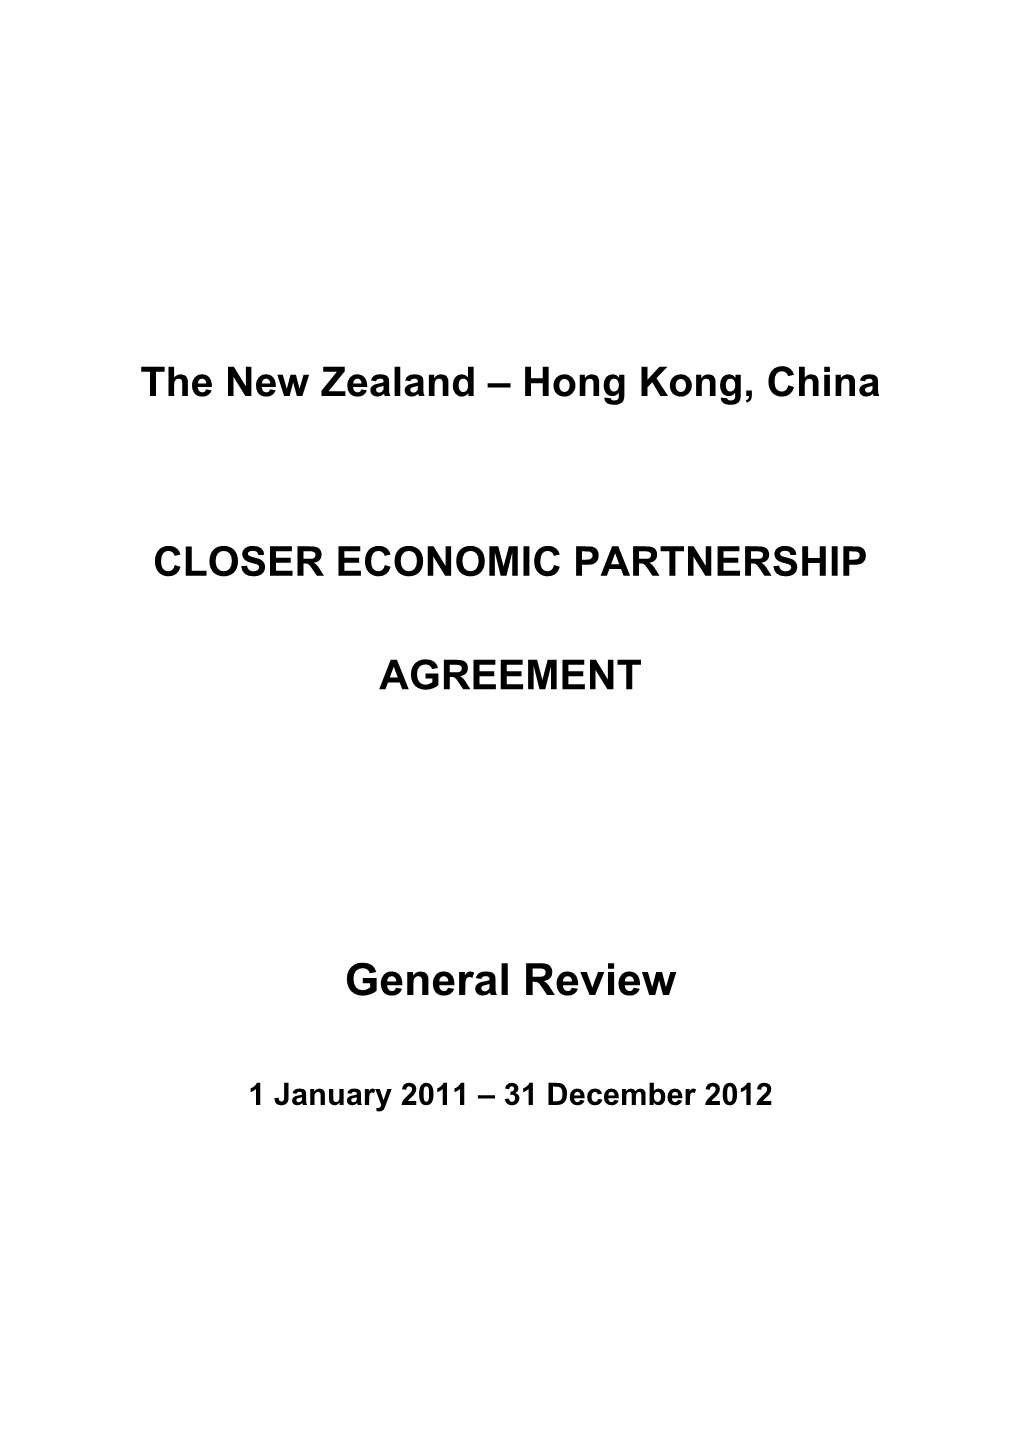 General Review of the New Zealand Hong Kong Closer Economic